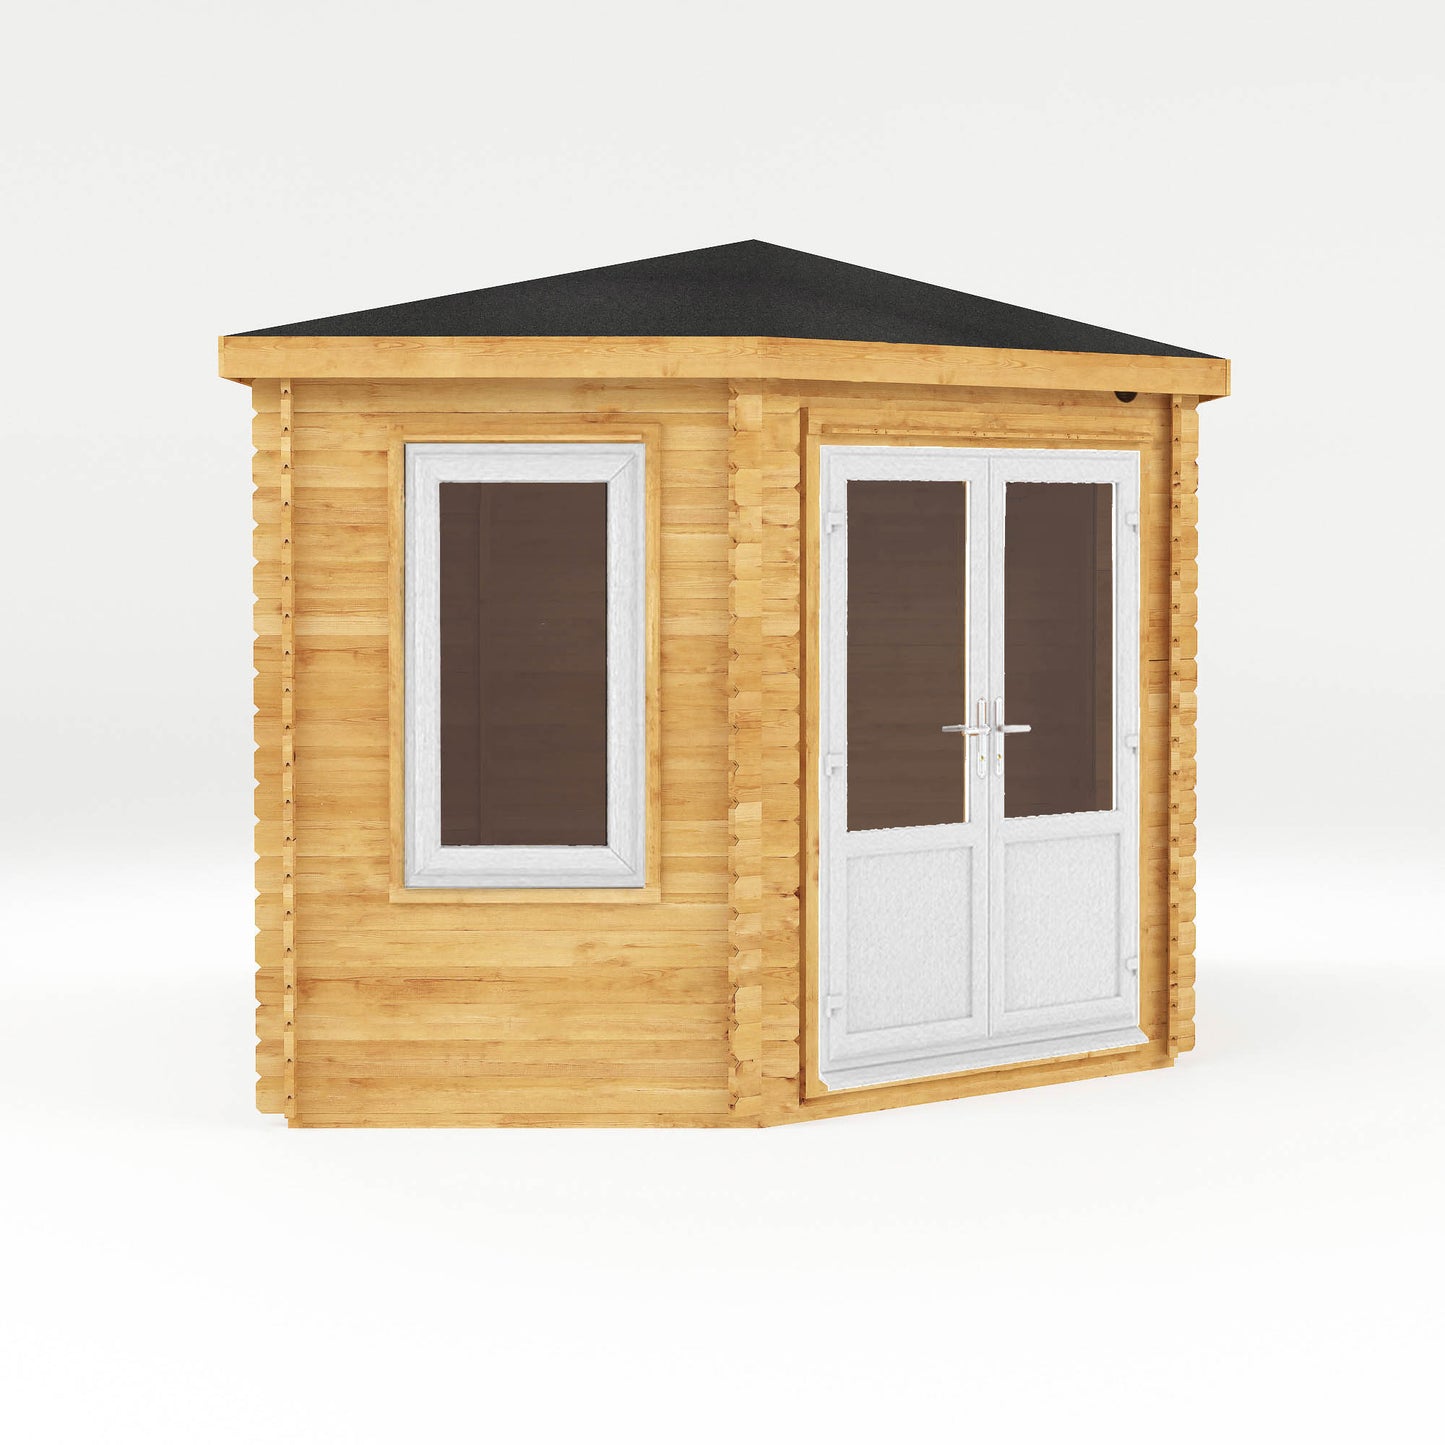 The Goldcrest 5m x 3m Log Cabin with White UPVC